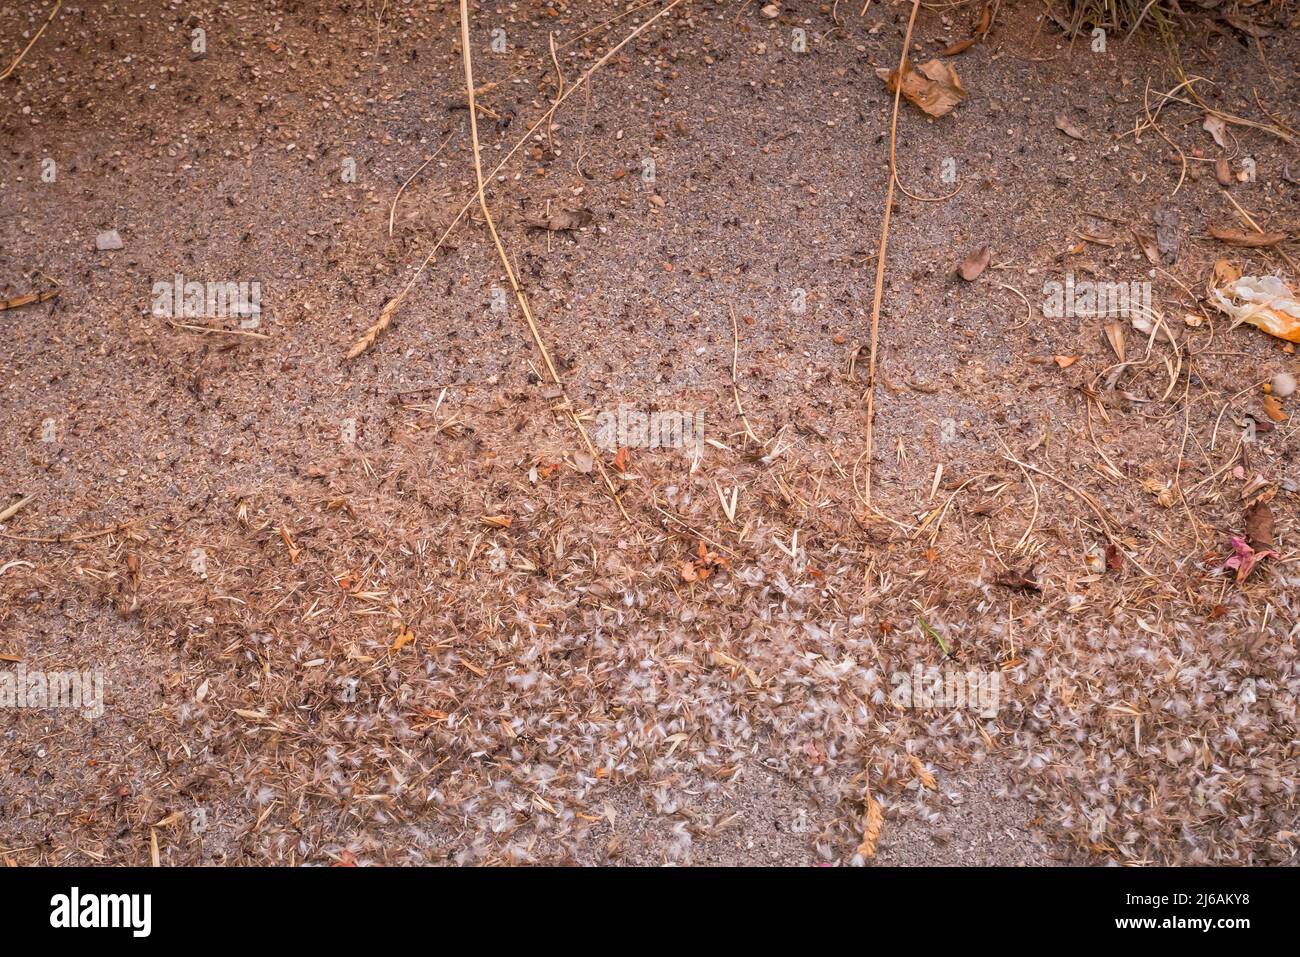 A colony of tiny ants swarming an area Stock Photo